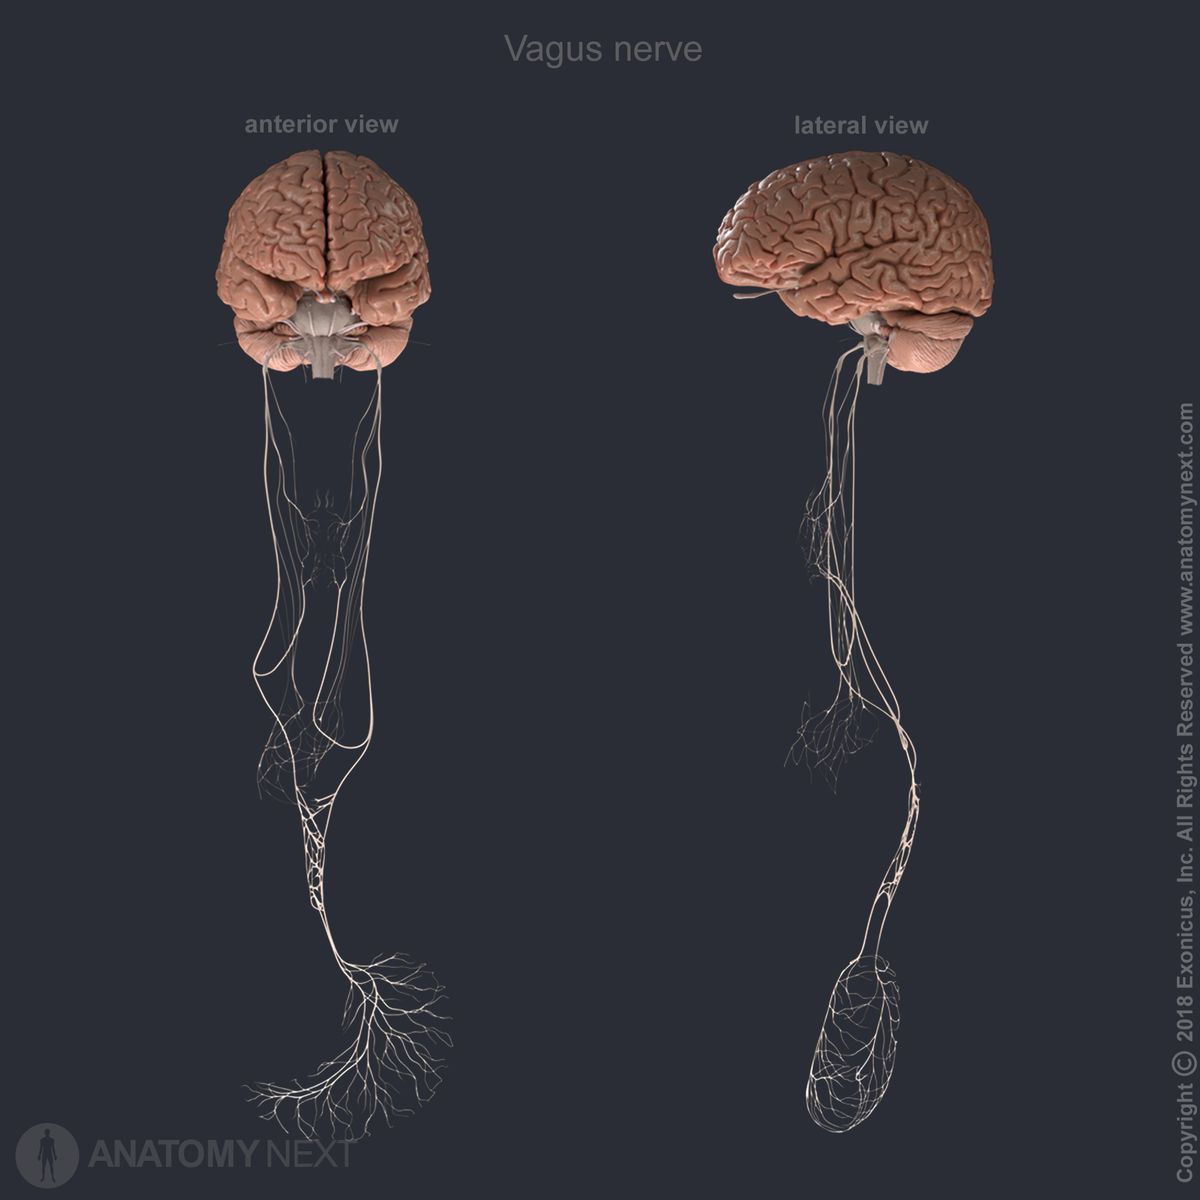 Vagus nerve, tenth cranial nerve, CN X, full view, two aspects (anterior view, lateral view), together with brain